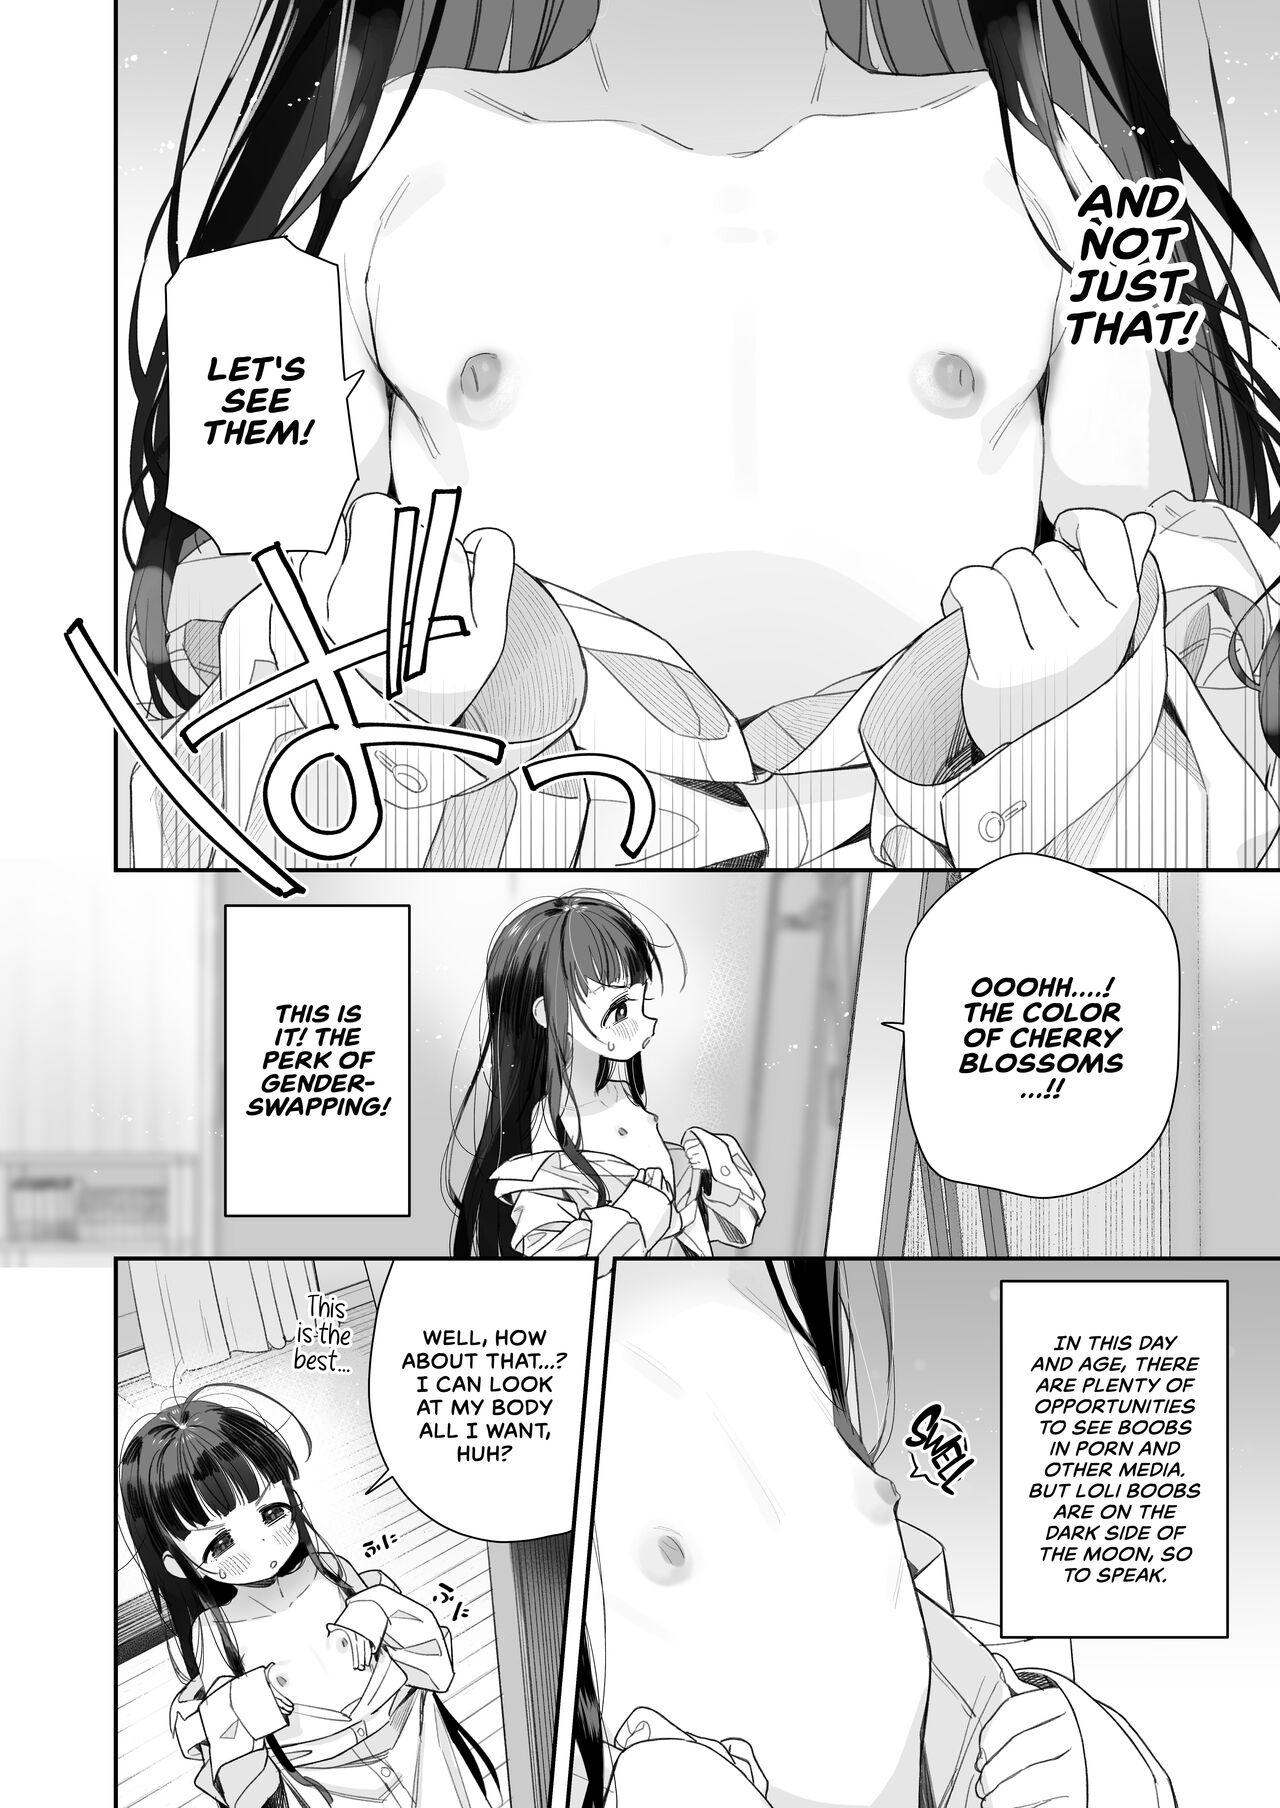 Big Boobs [Asunaro Neat. (Ronna)] TS Loli Oji-san no Bouken Onanie Hen | The Adventures of an Old Man Who Was Gender-Swapped Into a Loli ~Masturbation Chapter~ [English] [CulturedCommissions] [Digital] - Original Girl Gets Fucked - Page 7